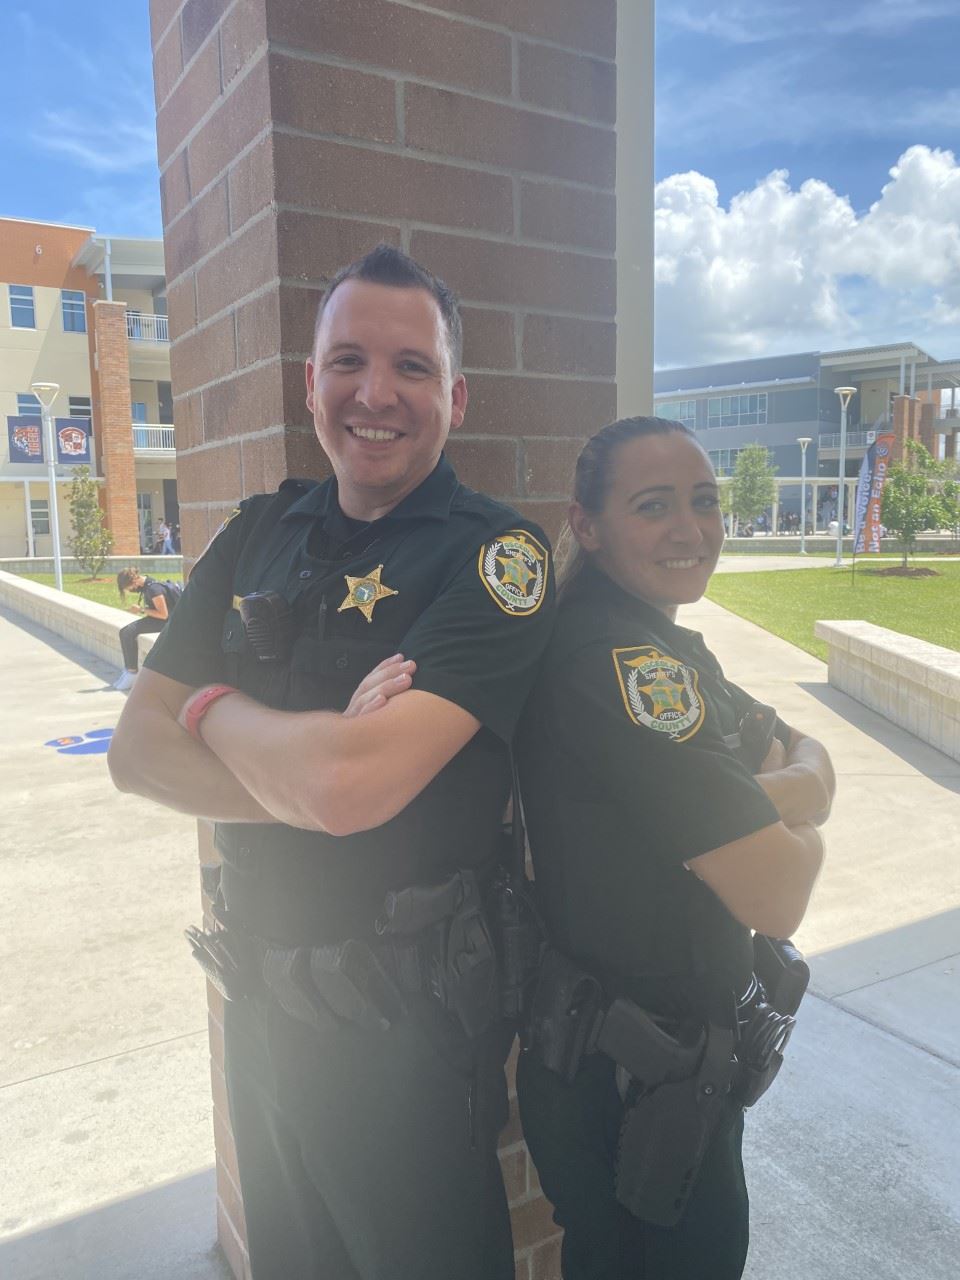  Meet our School Resource Officers: Officer Eddy and Officer Morgan